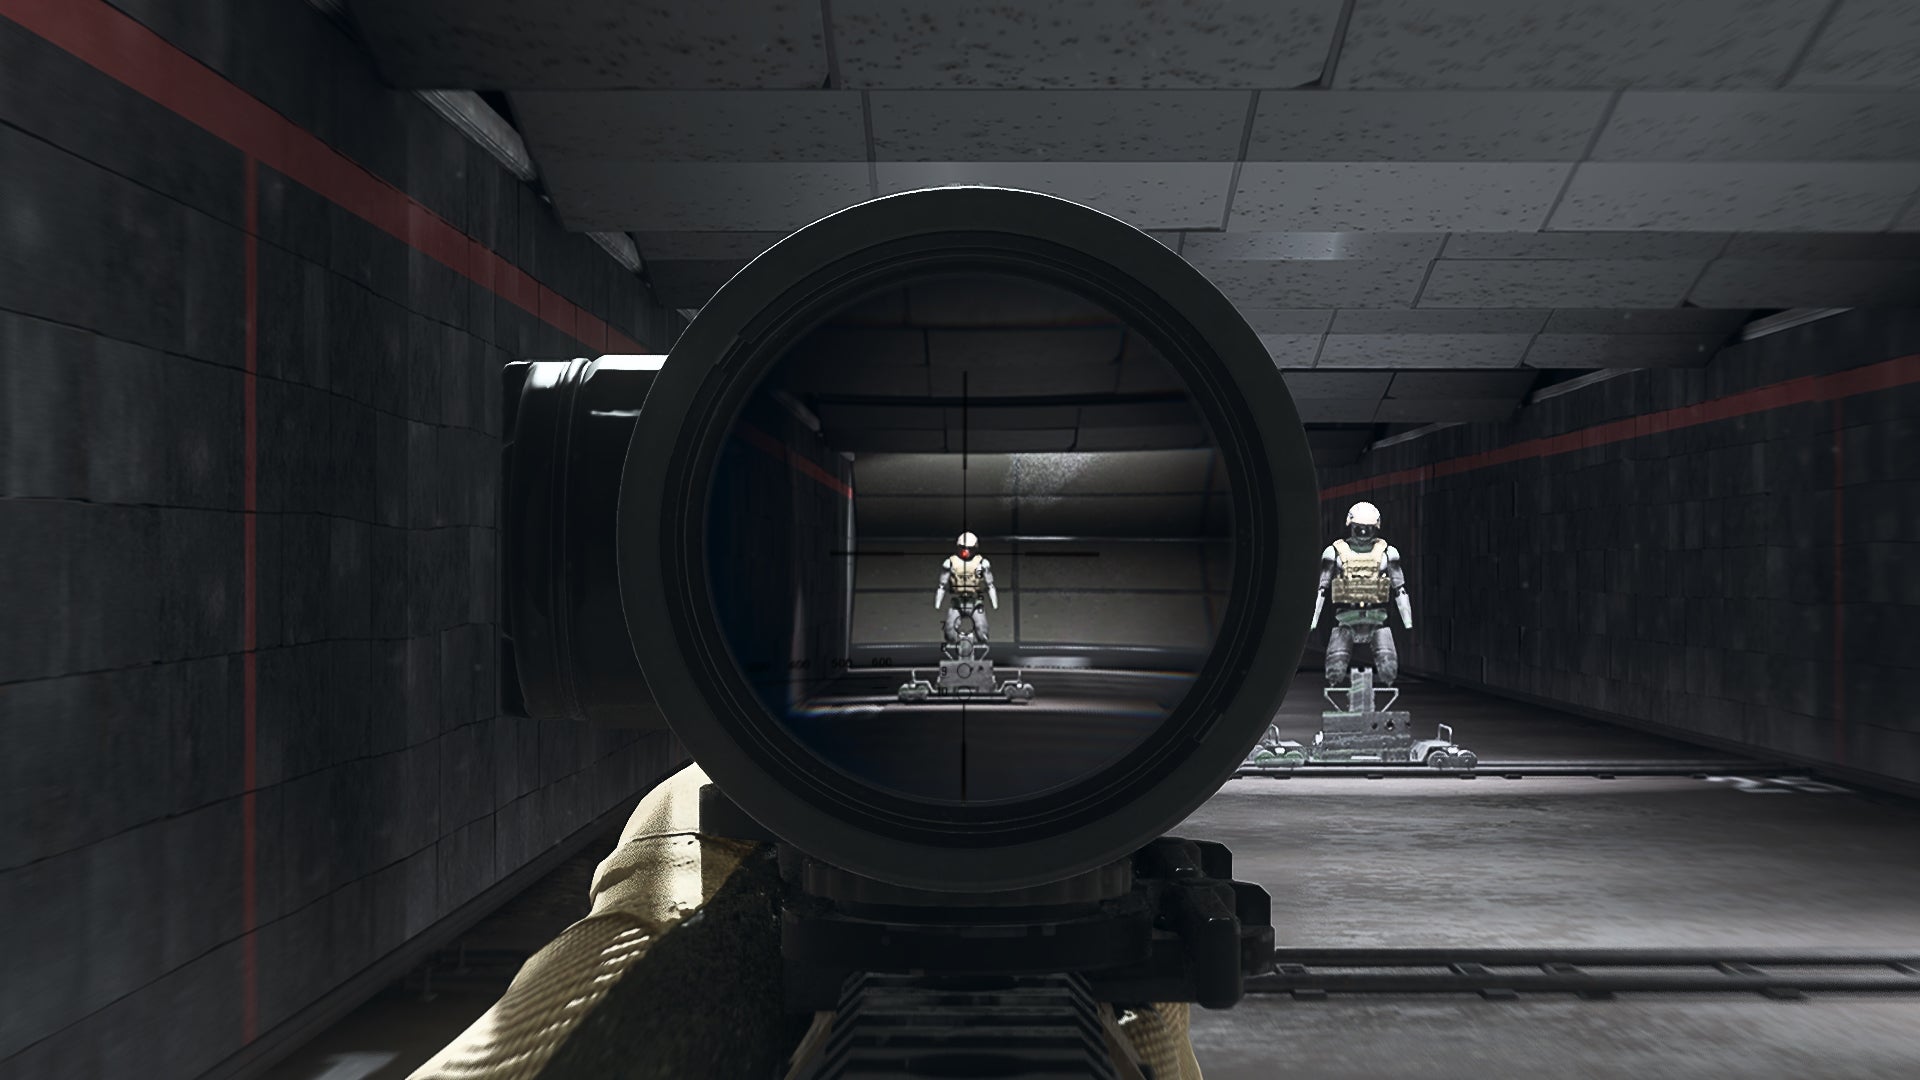 The player in Warzone 2.0 aims at a training dummy using the Cronen Zero P Optic optic attachment.